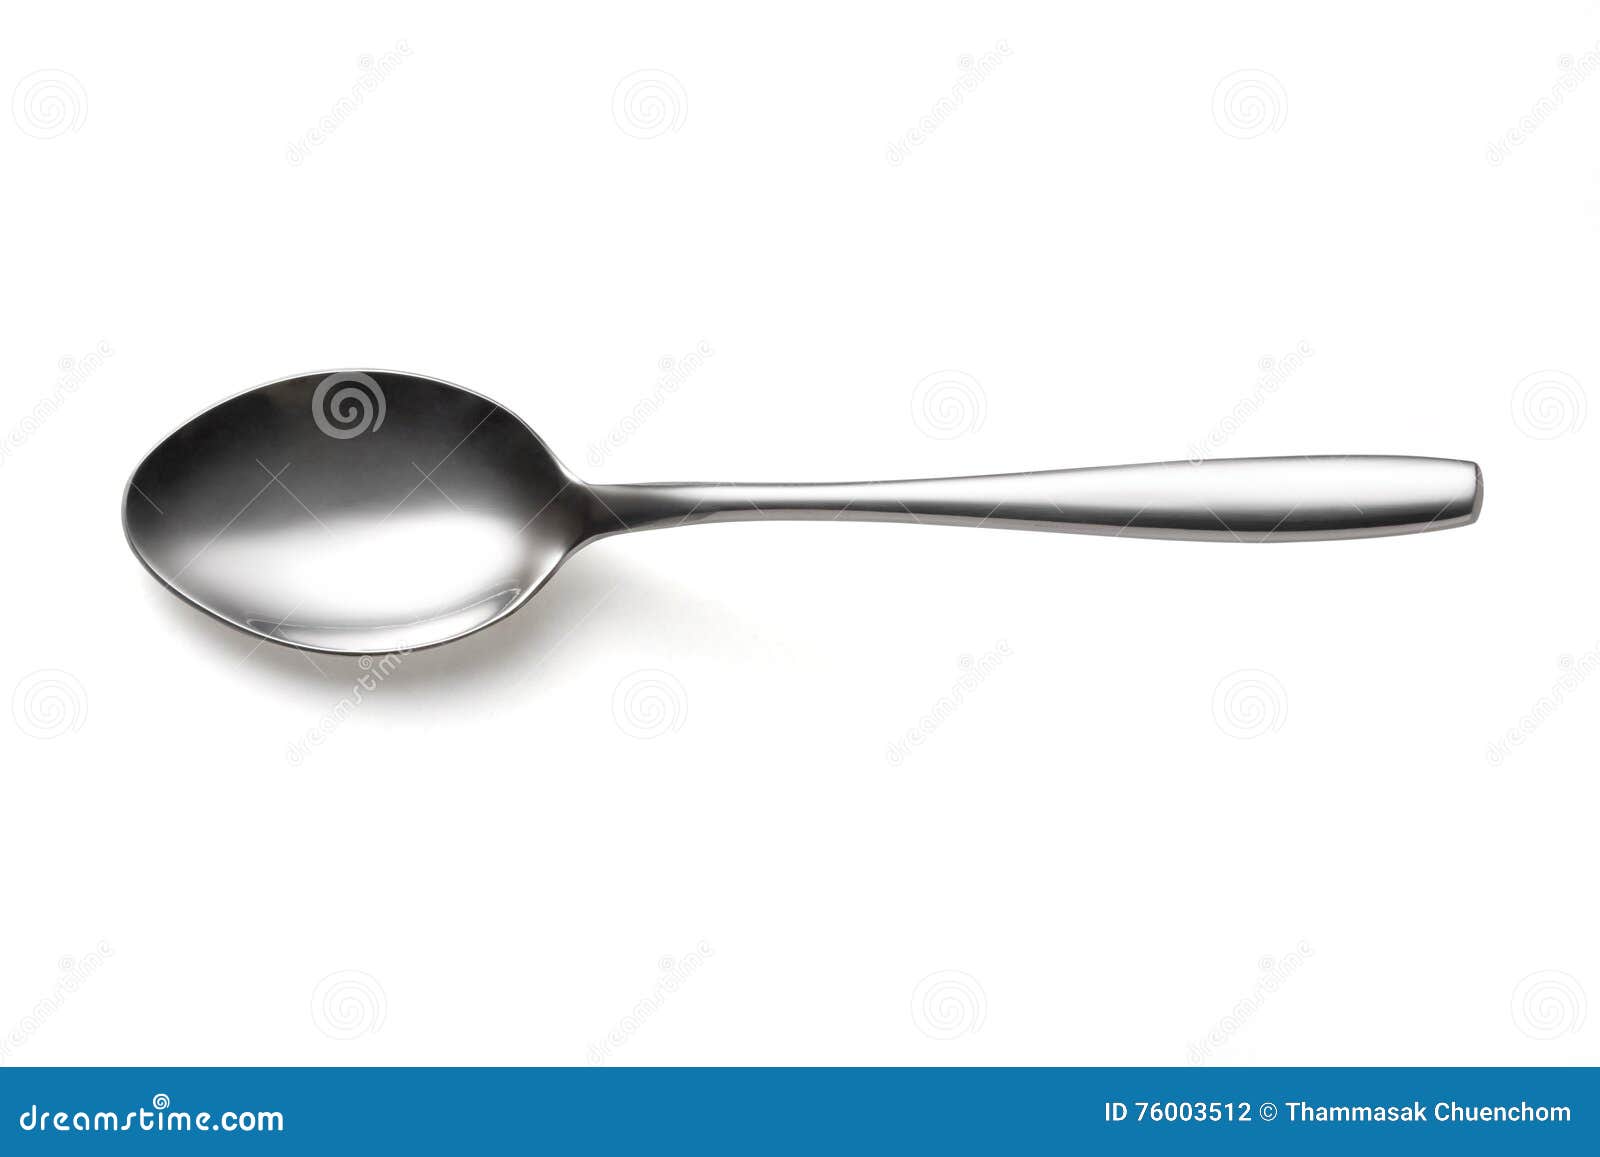 Clean shiny metal spoon isolated on white. Stainless steel small